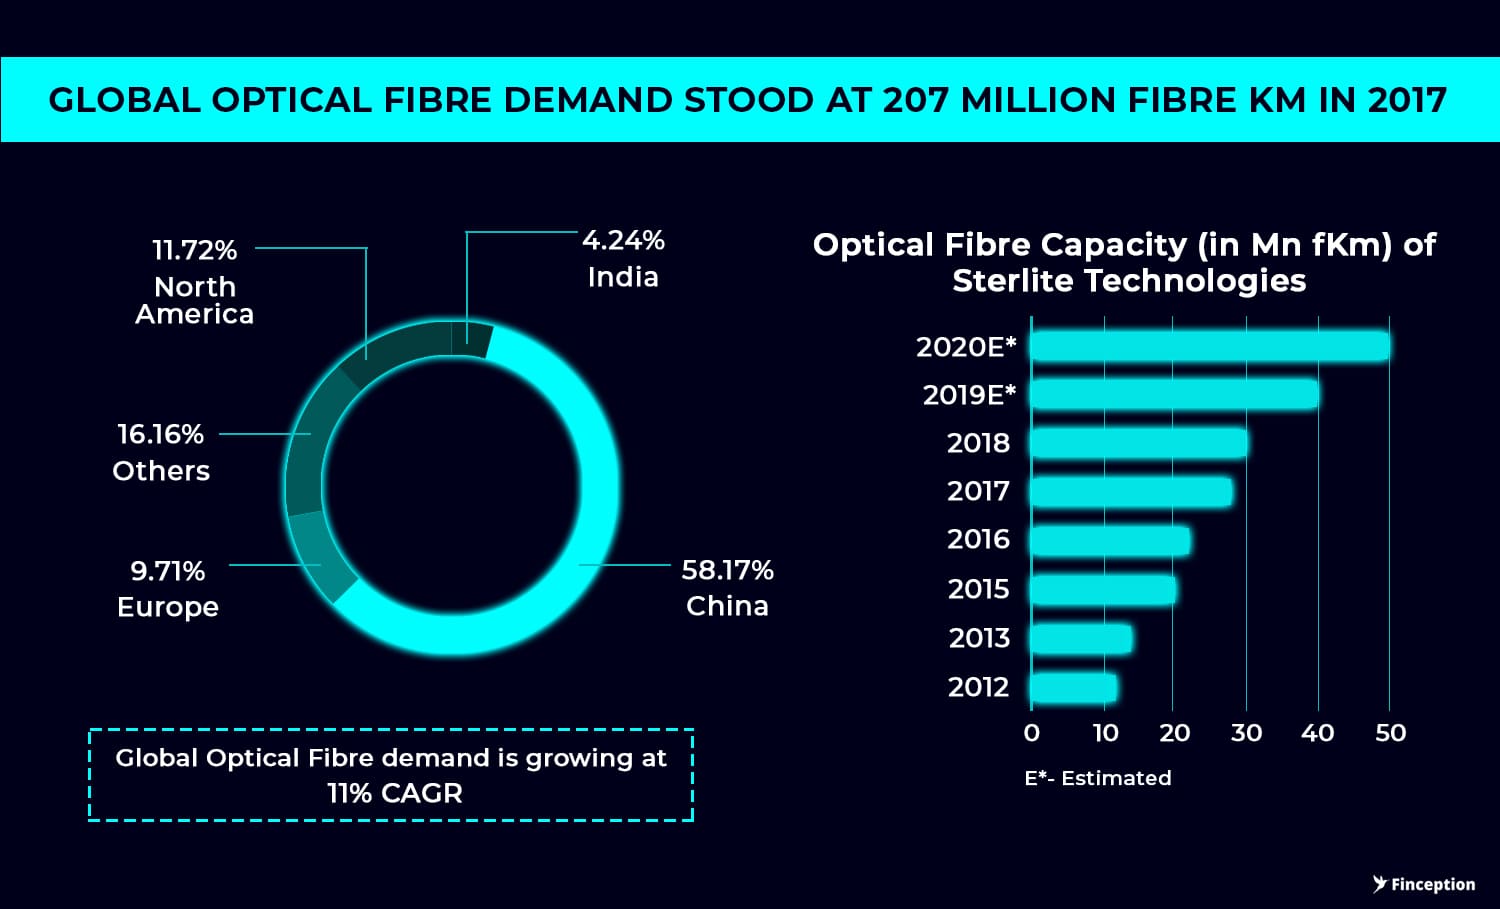 China consumes more than 50% of the world's optical fibre production. In India Sterlite Technologies is increasing its capacity to cater global demand